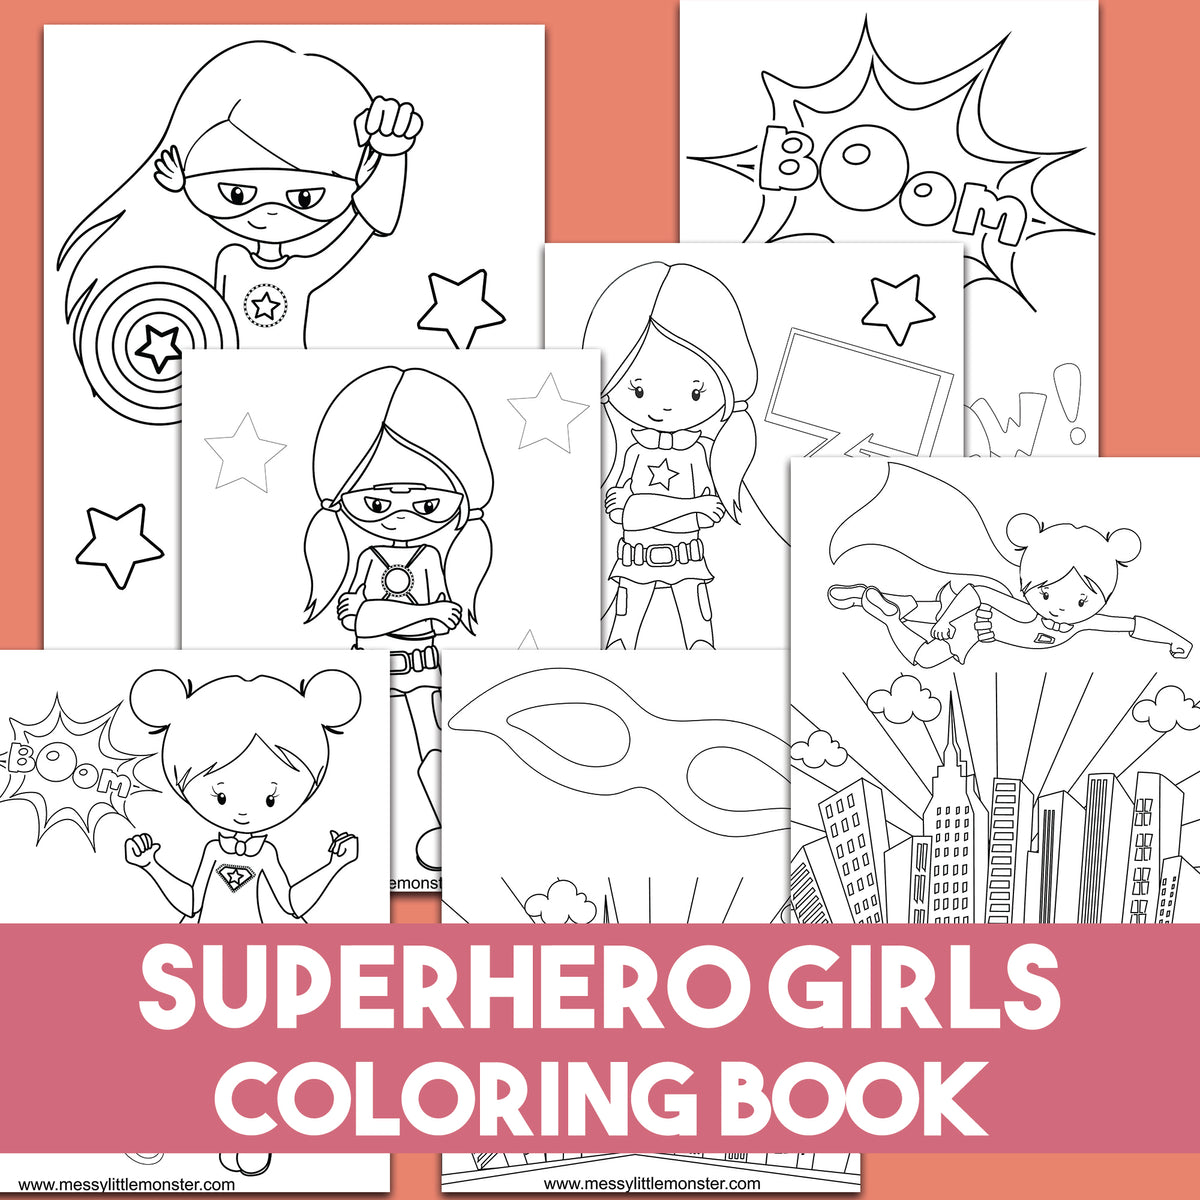 Girl superhero coloring pages â messy little monster shop